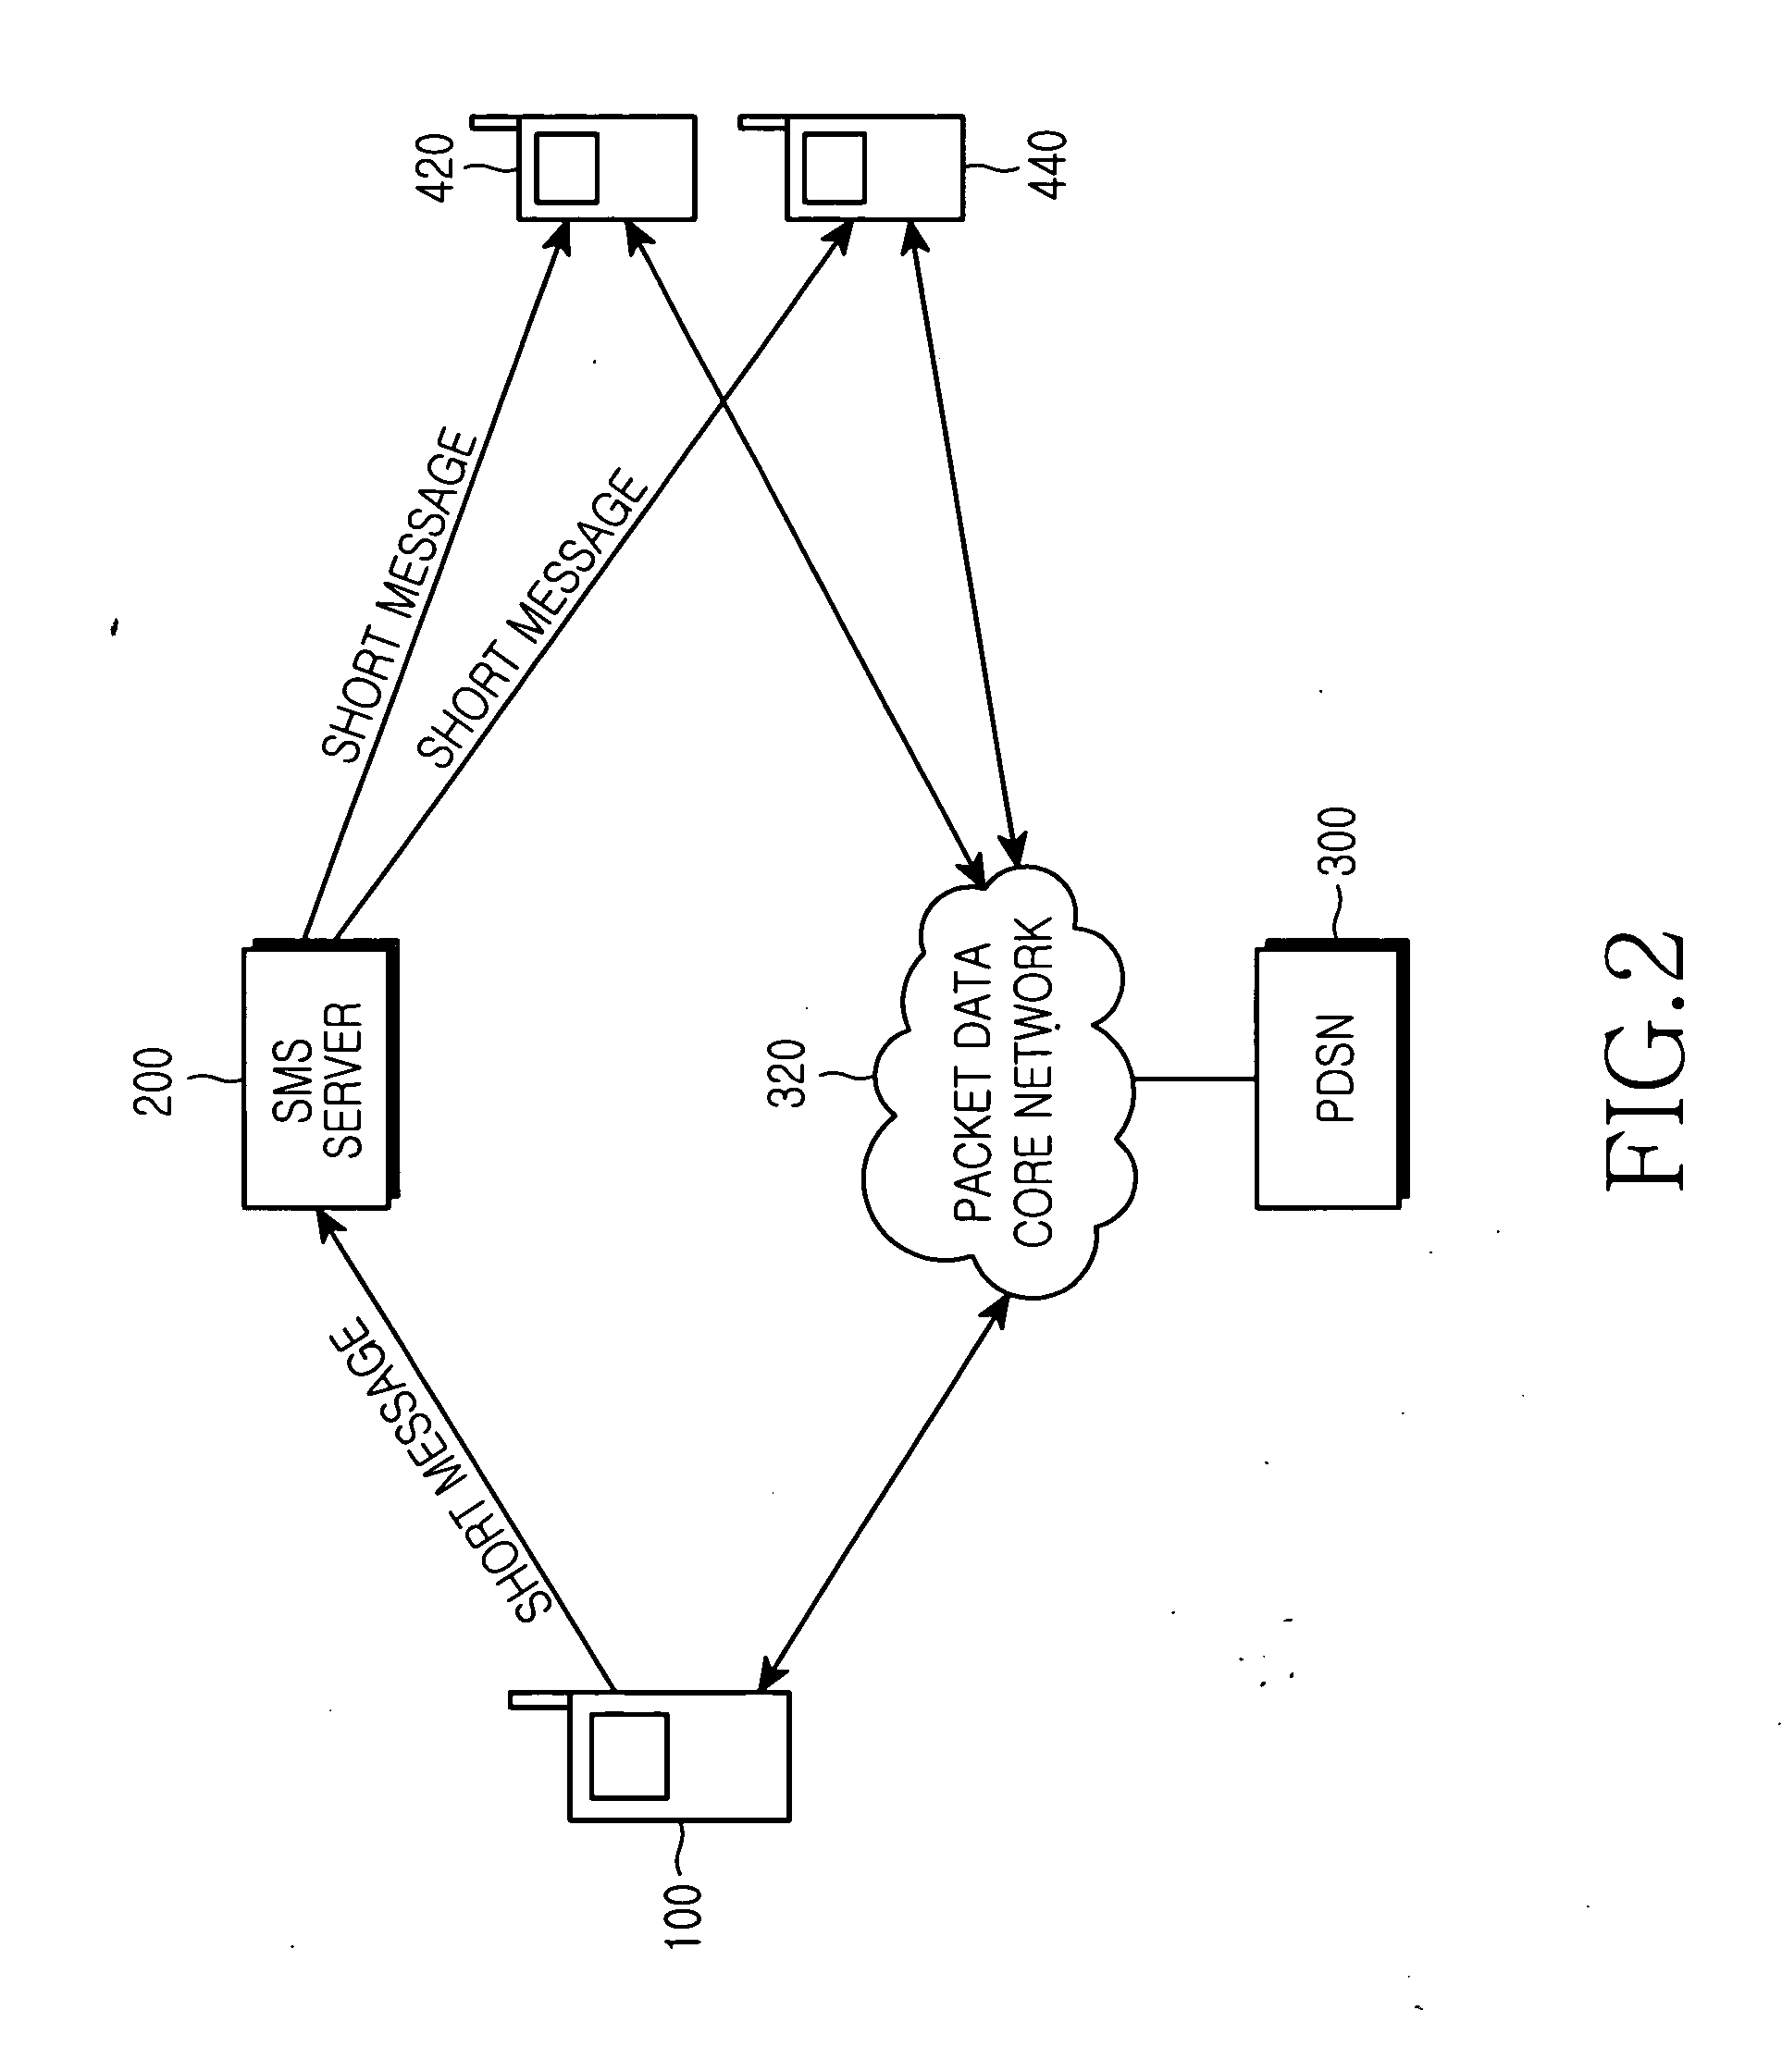 Mobile communication system and method for providing real time messenger service among mobile communication terminals